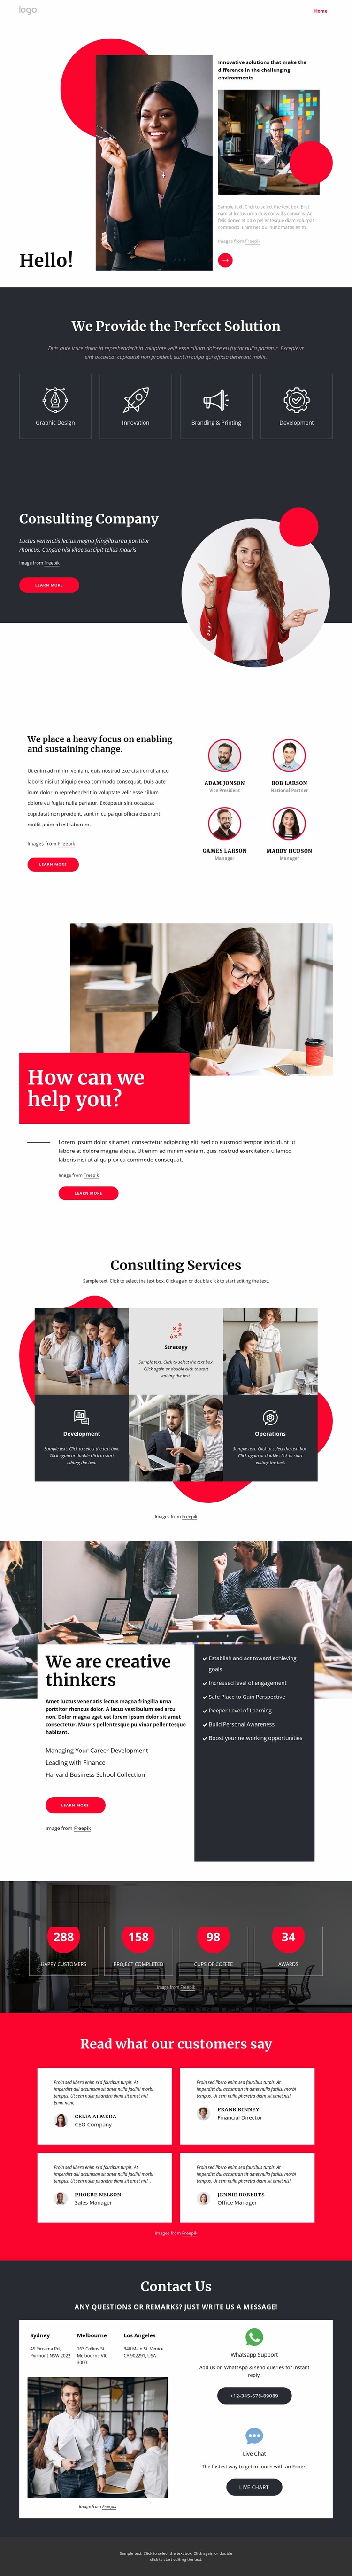 Consulting company NYC Website Design